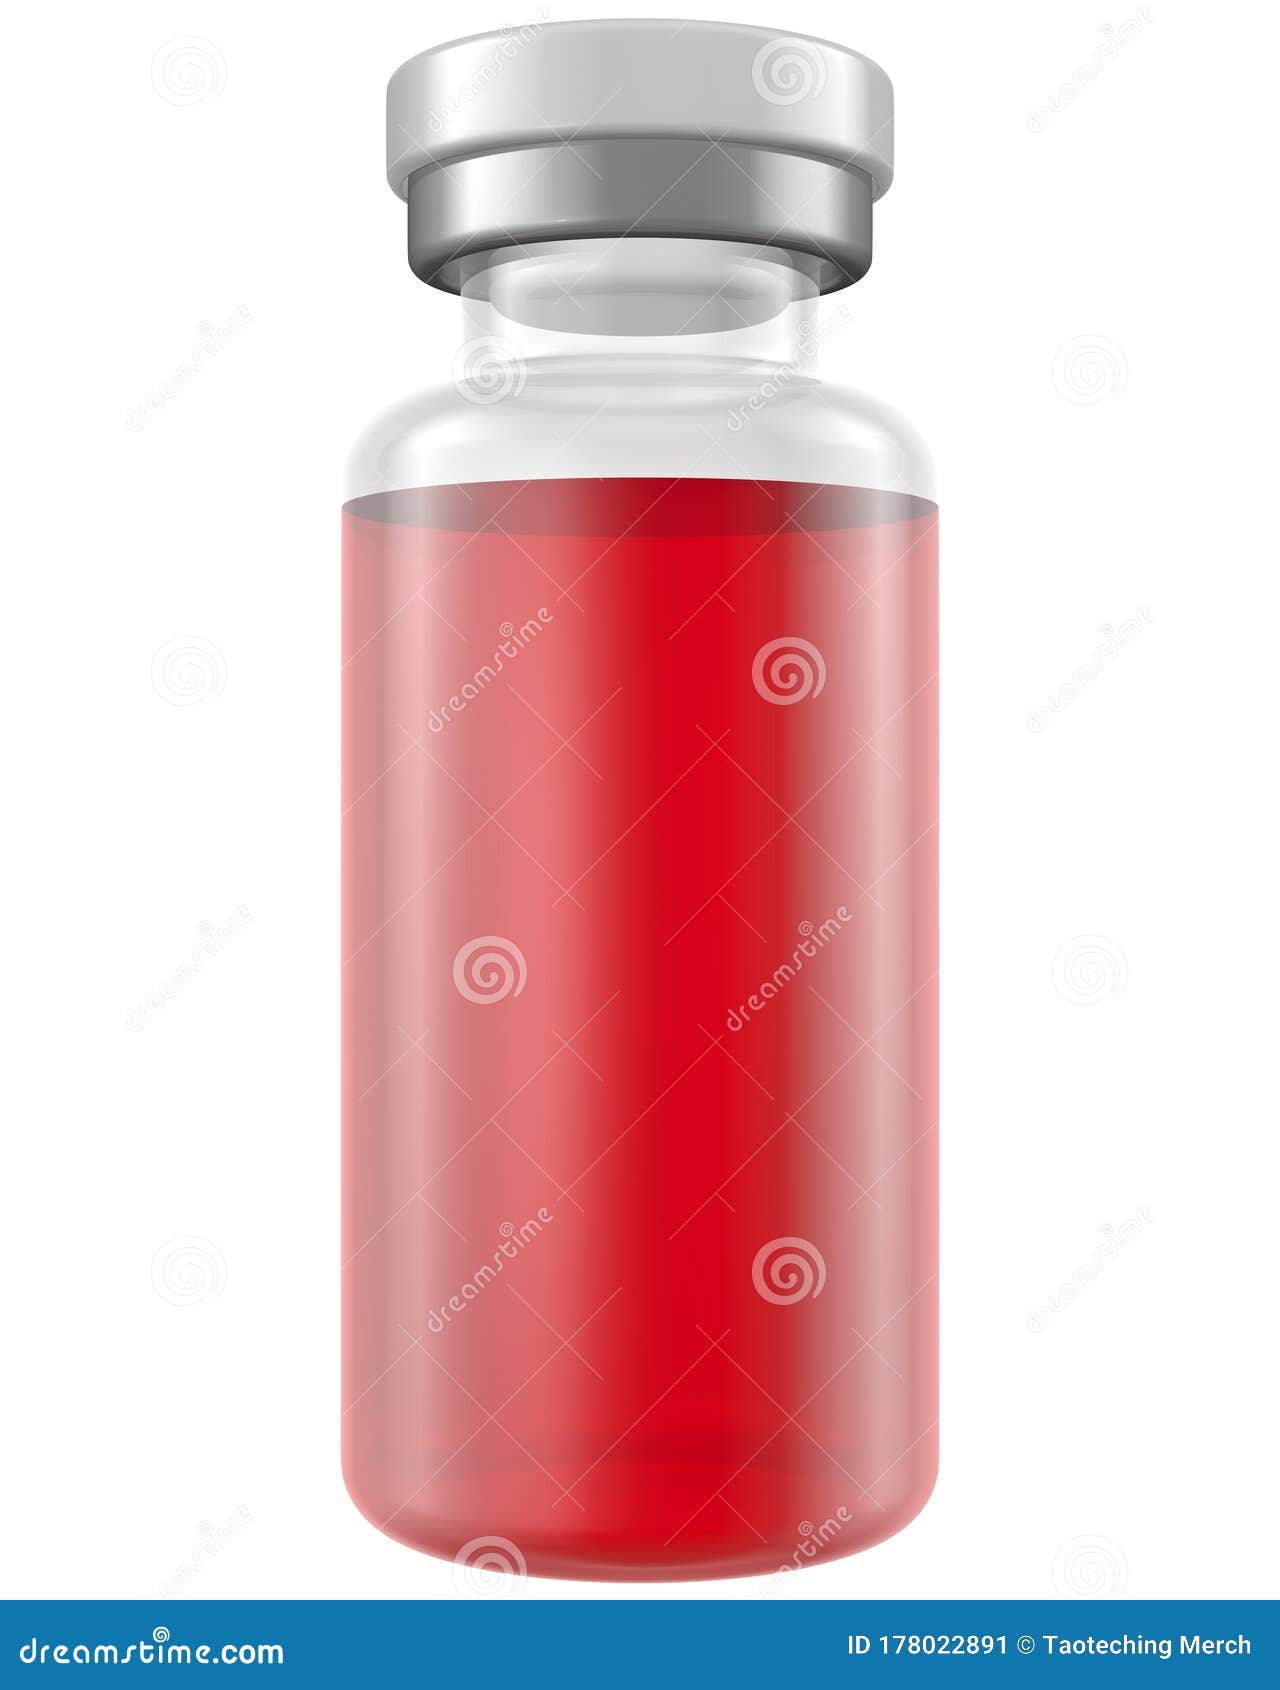 Download Realistic 3D 10ml Vial Glass Bottle Mock Up Template On White Background.3D Rendering,3D ...